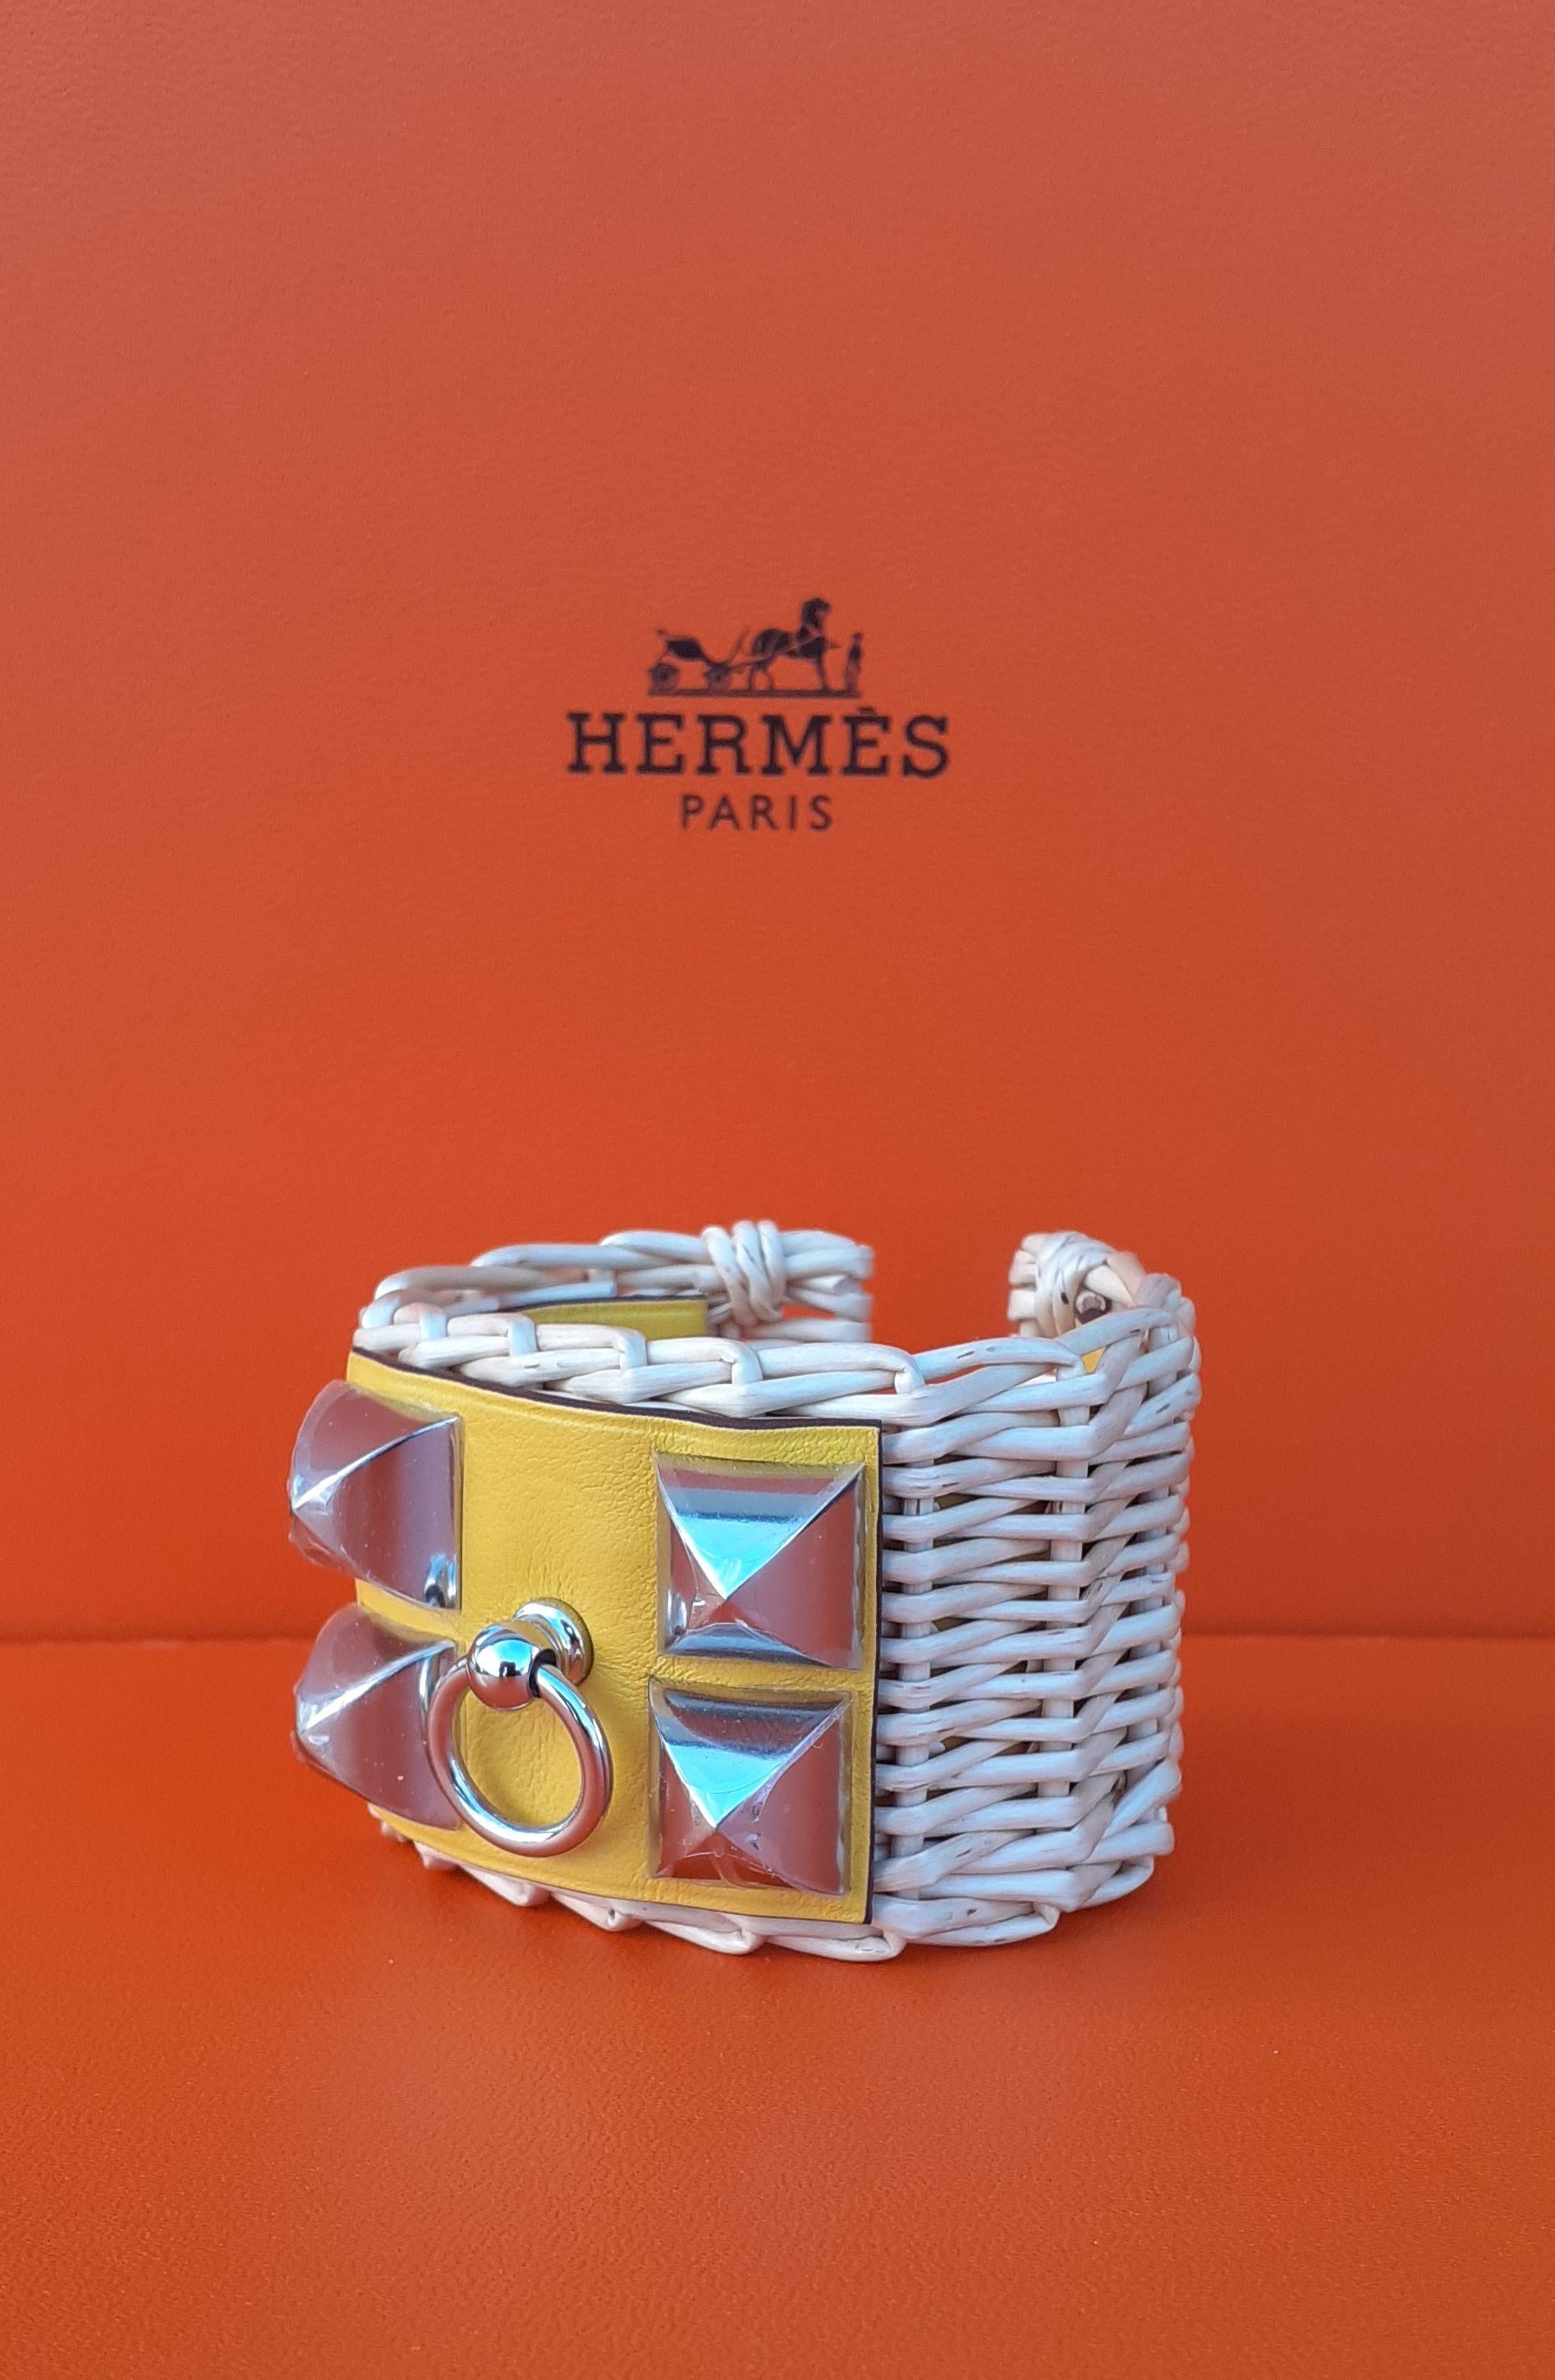 Gorgeous Authentic Hermès Cuff

Pattern: Medor / Collier de Chien (CDC)

Form: Cuff / Manchette / Open Bracelet

Wicker Line in Limited Edition ! Will perfectly match your Kelly or Birkin Picnic Bag !

